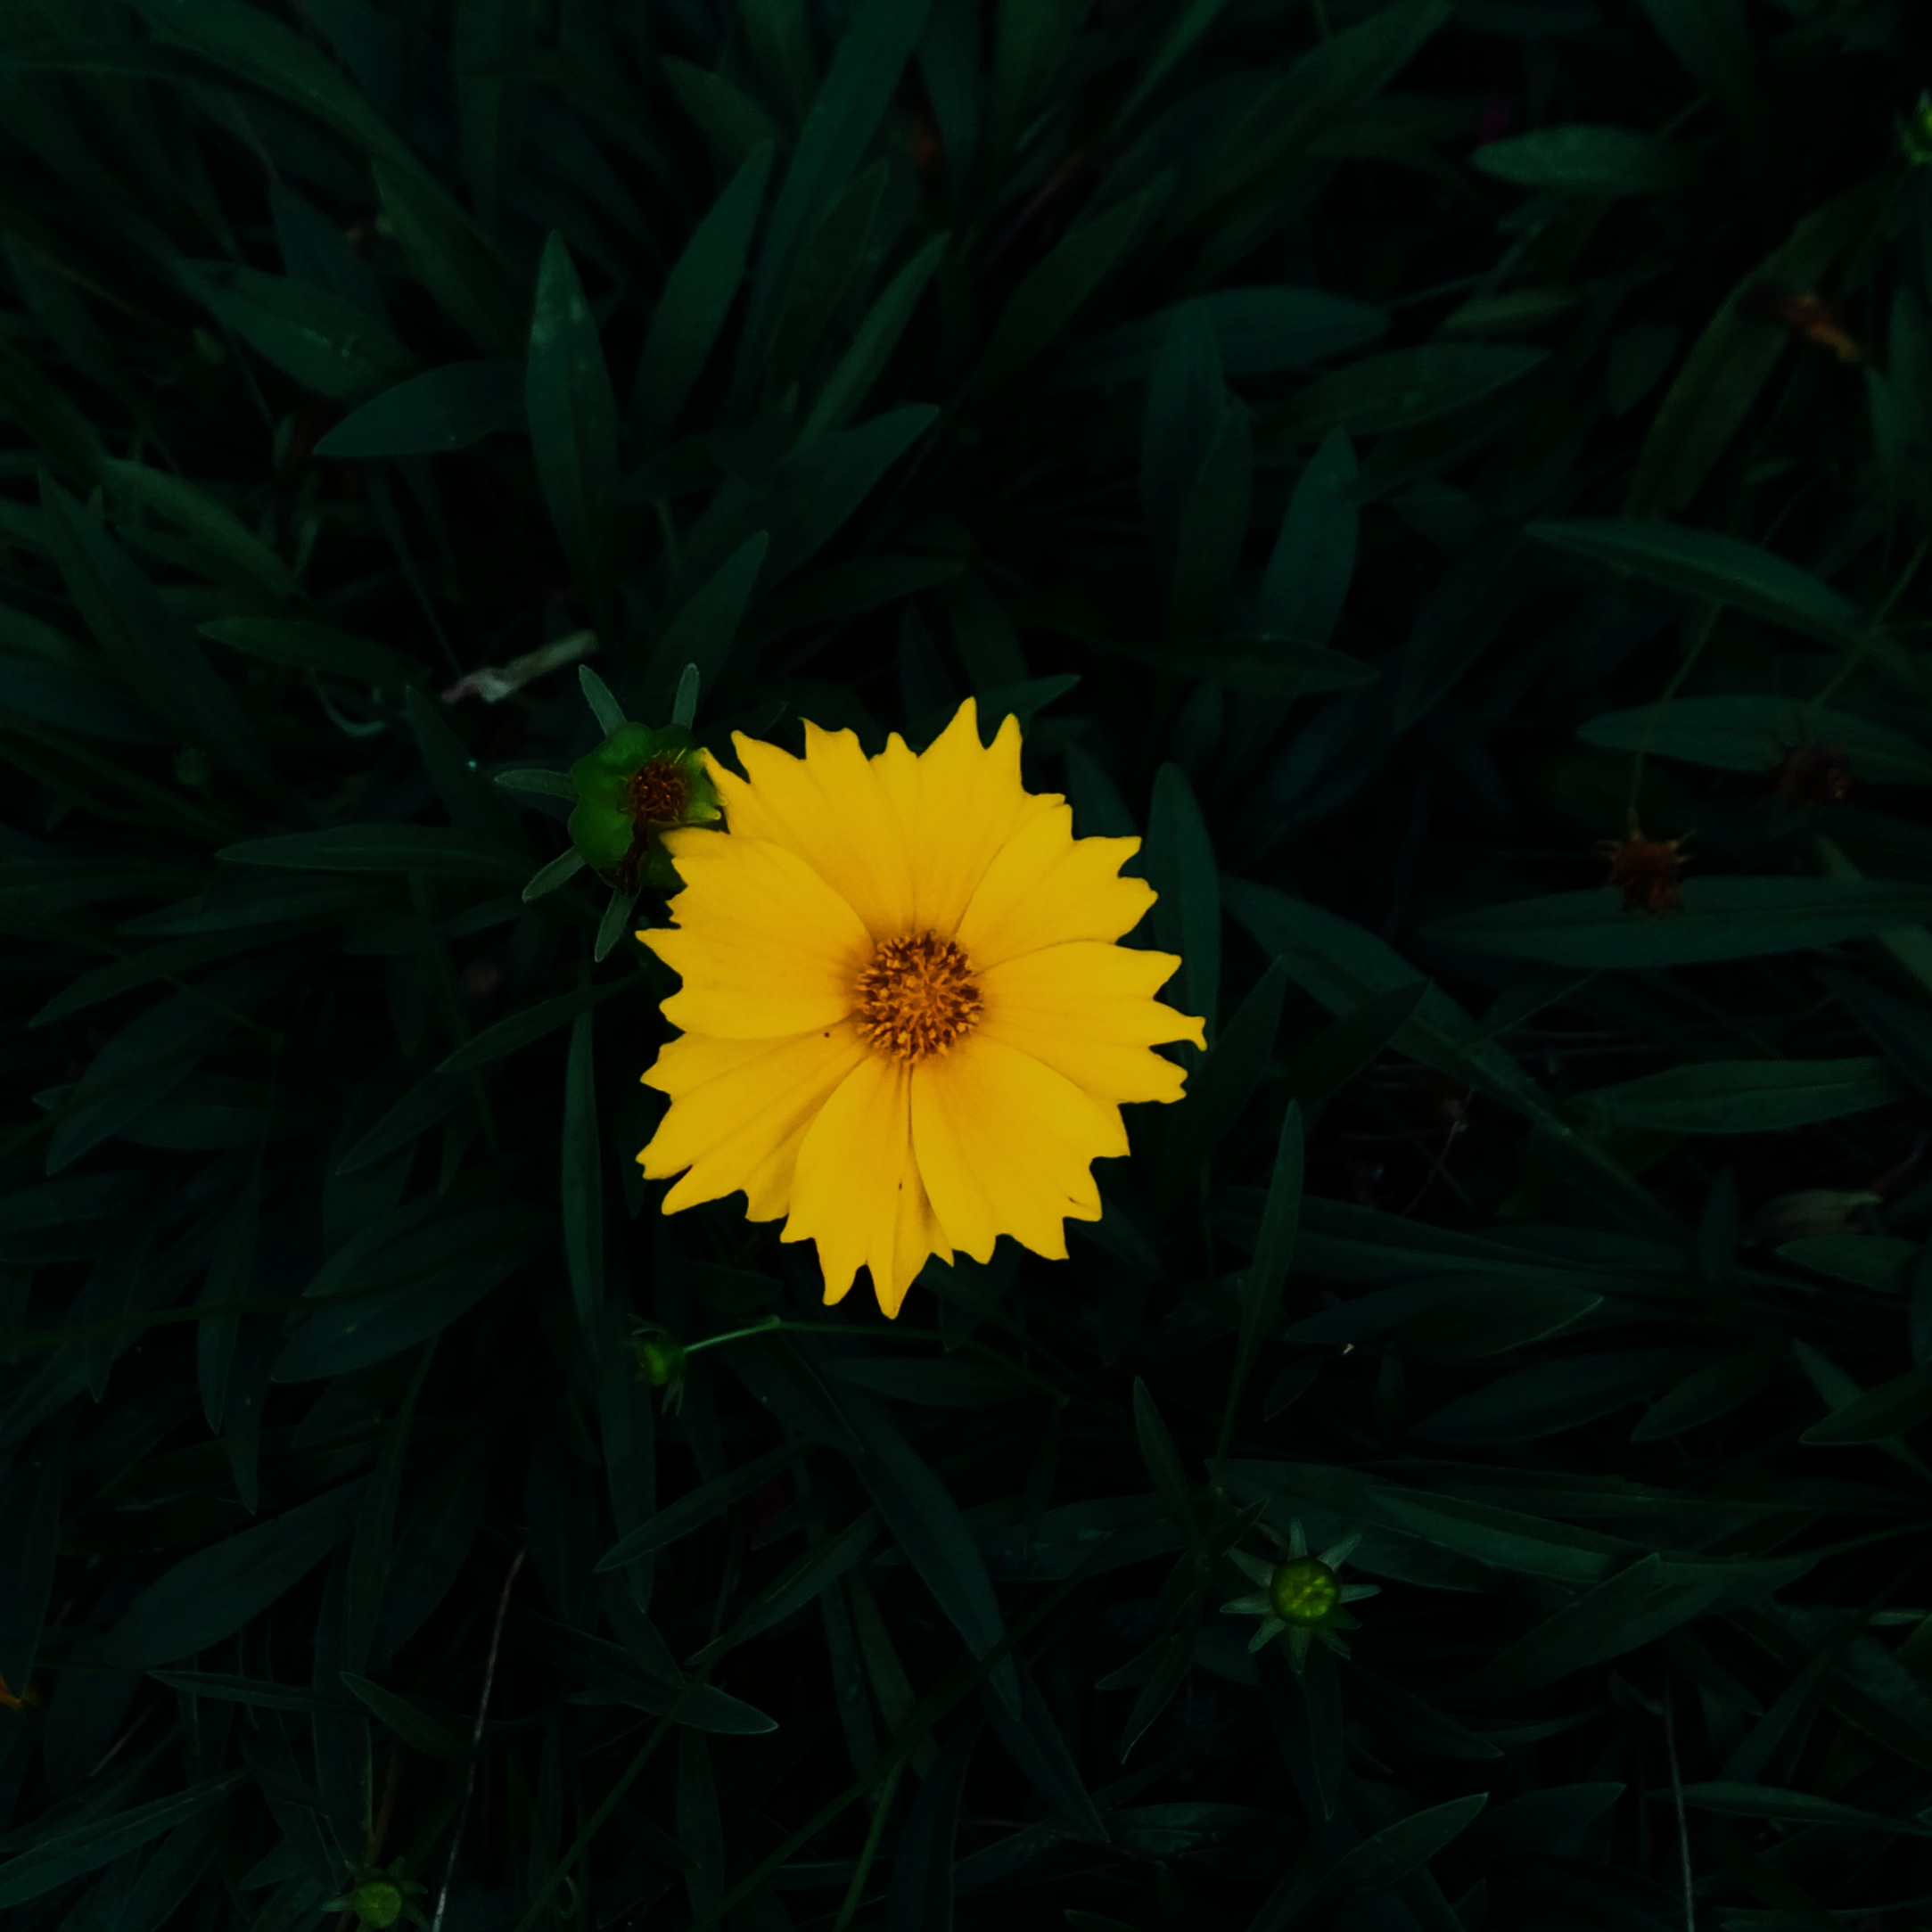 Single yellow flower with dark green leaves